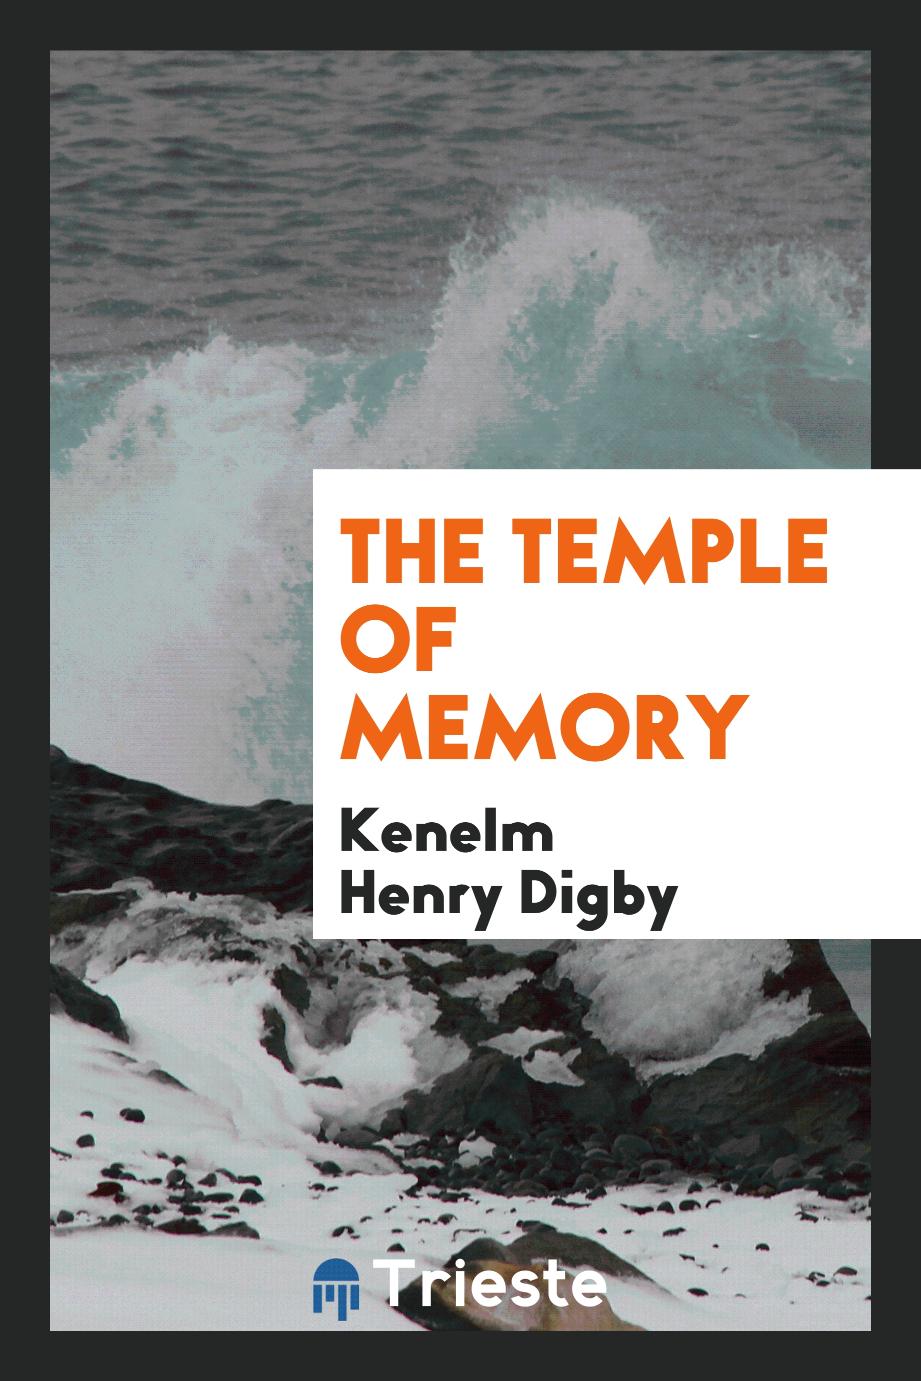 The temple of memory